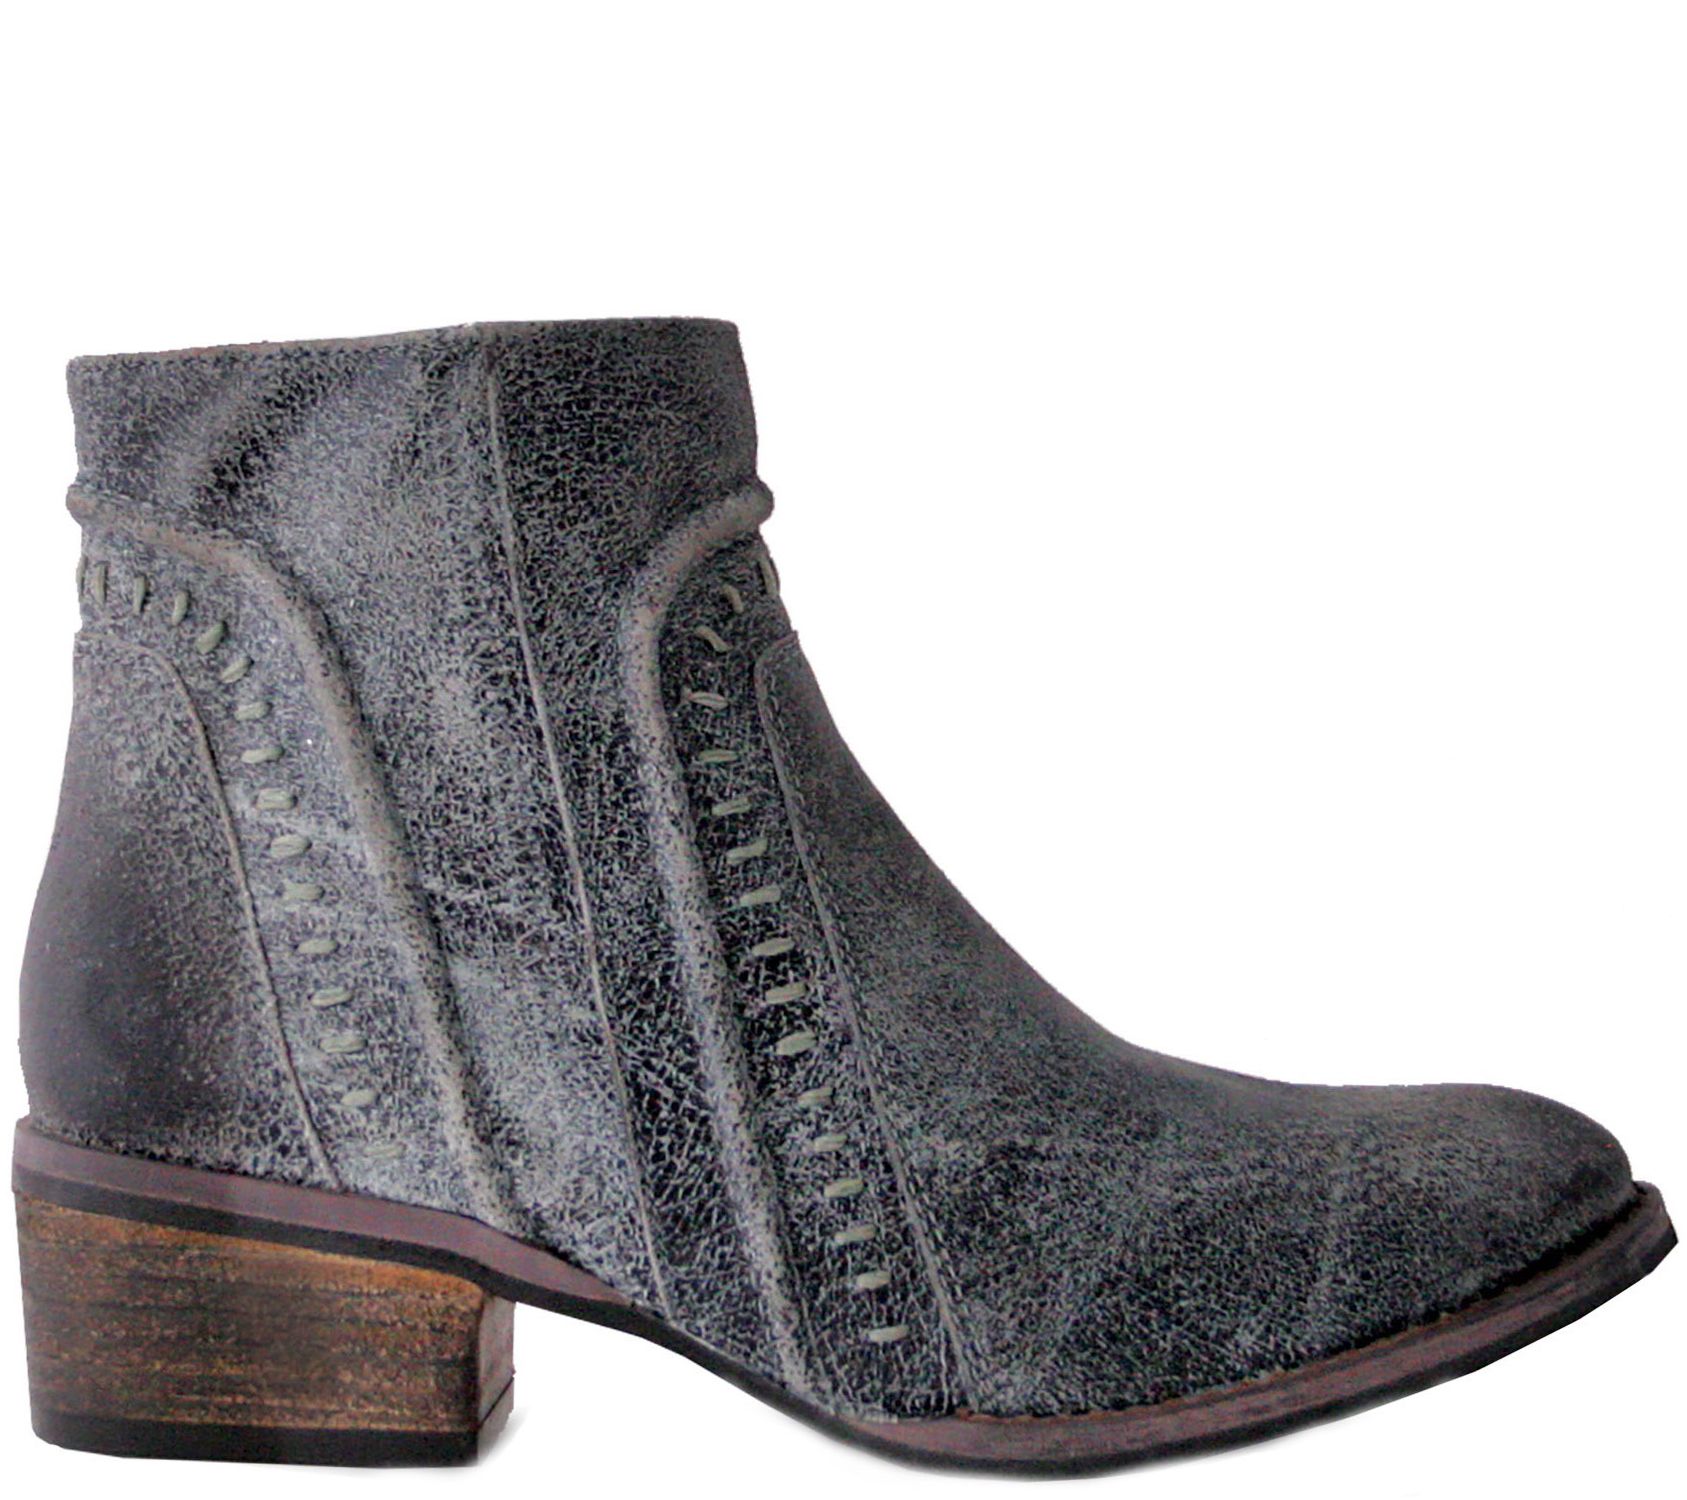 Nomad Leather Ankle Boots - Jameson - QVC.com